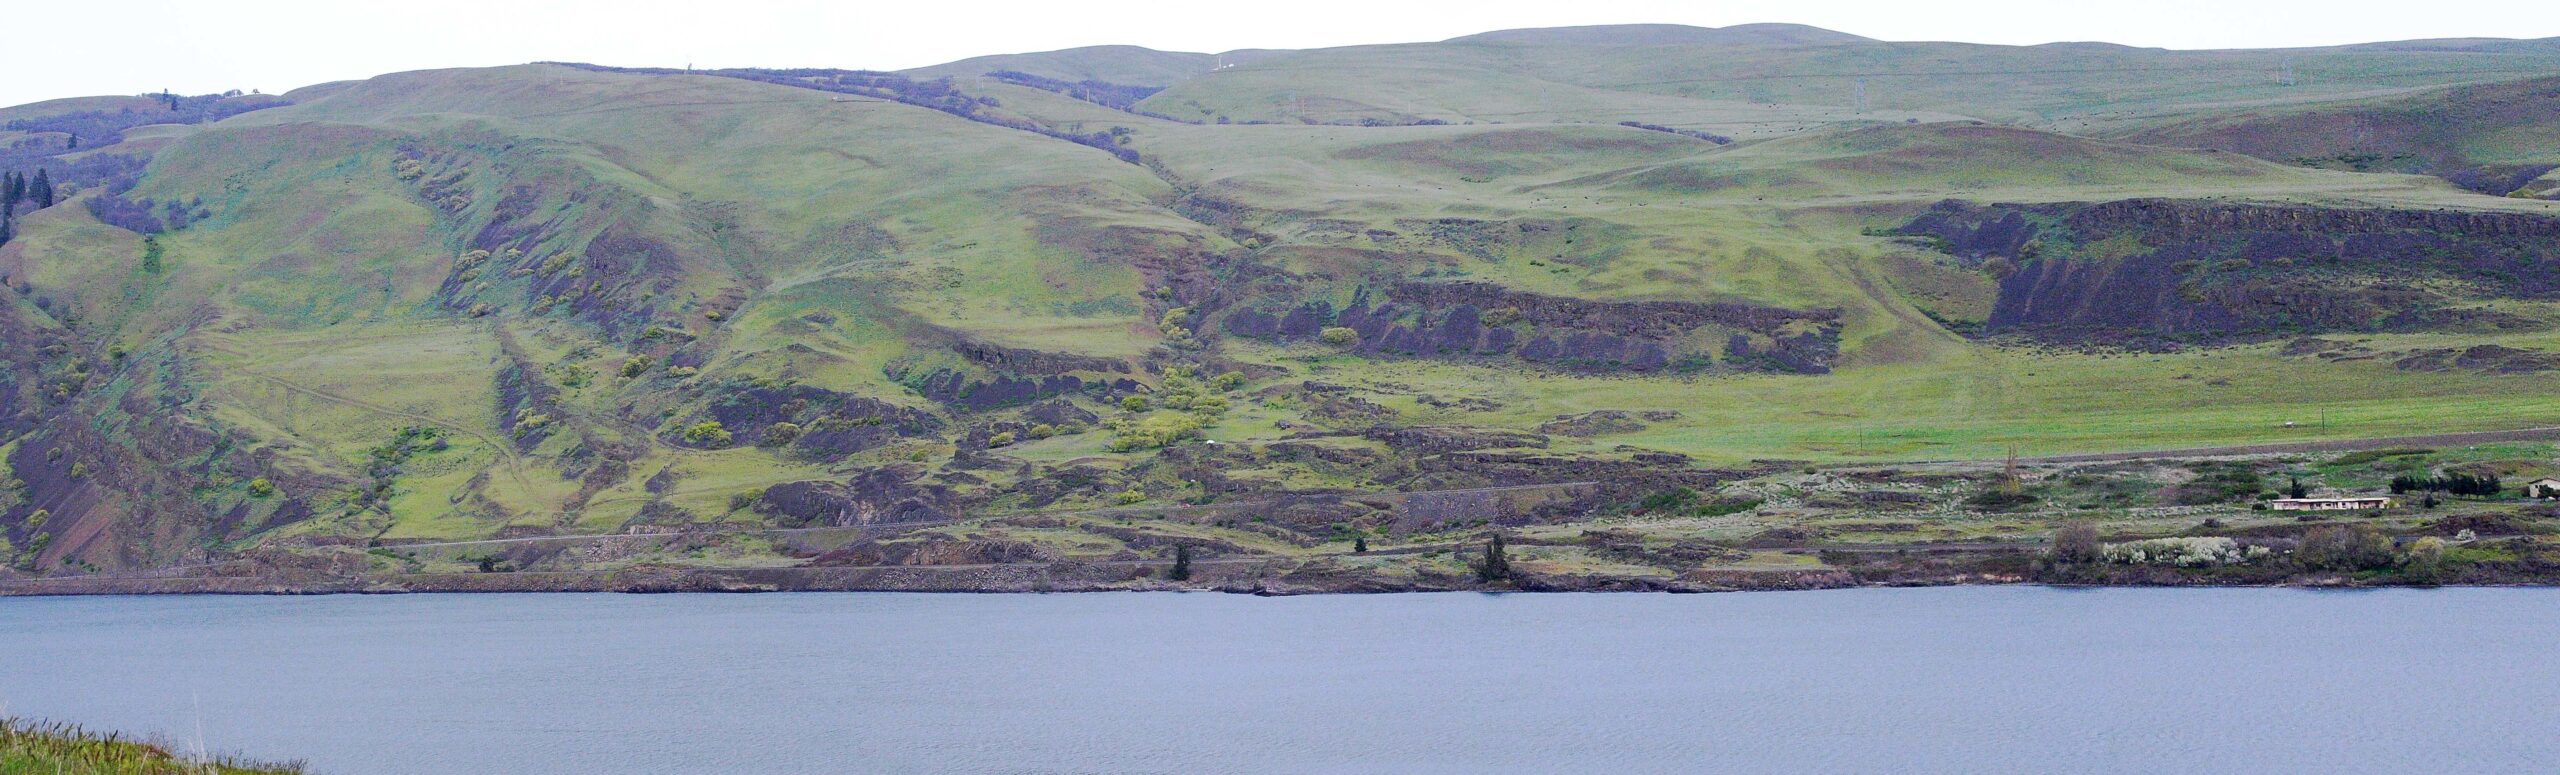 Riverfront Trail at The Dalles